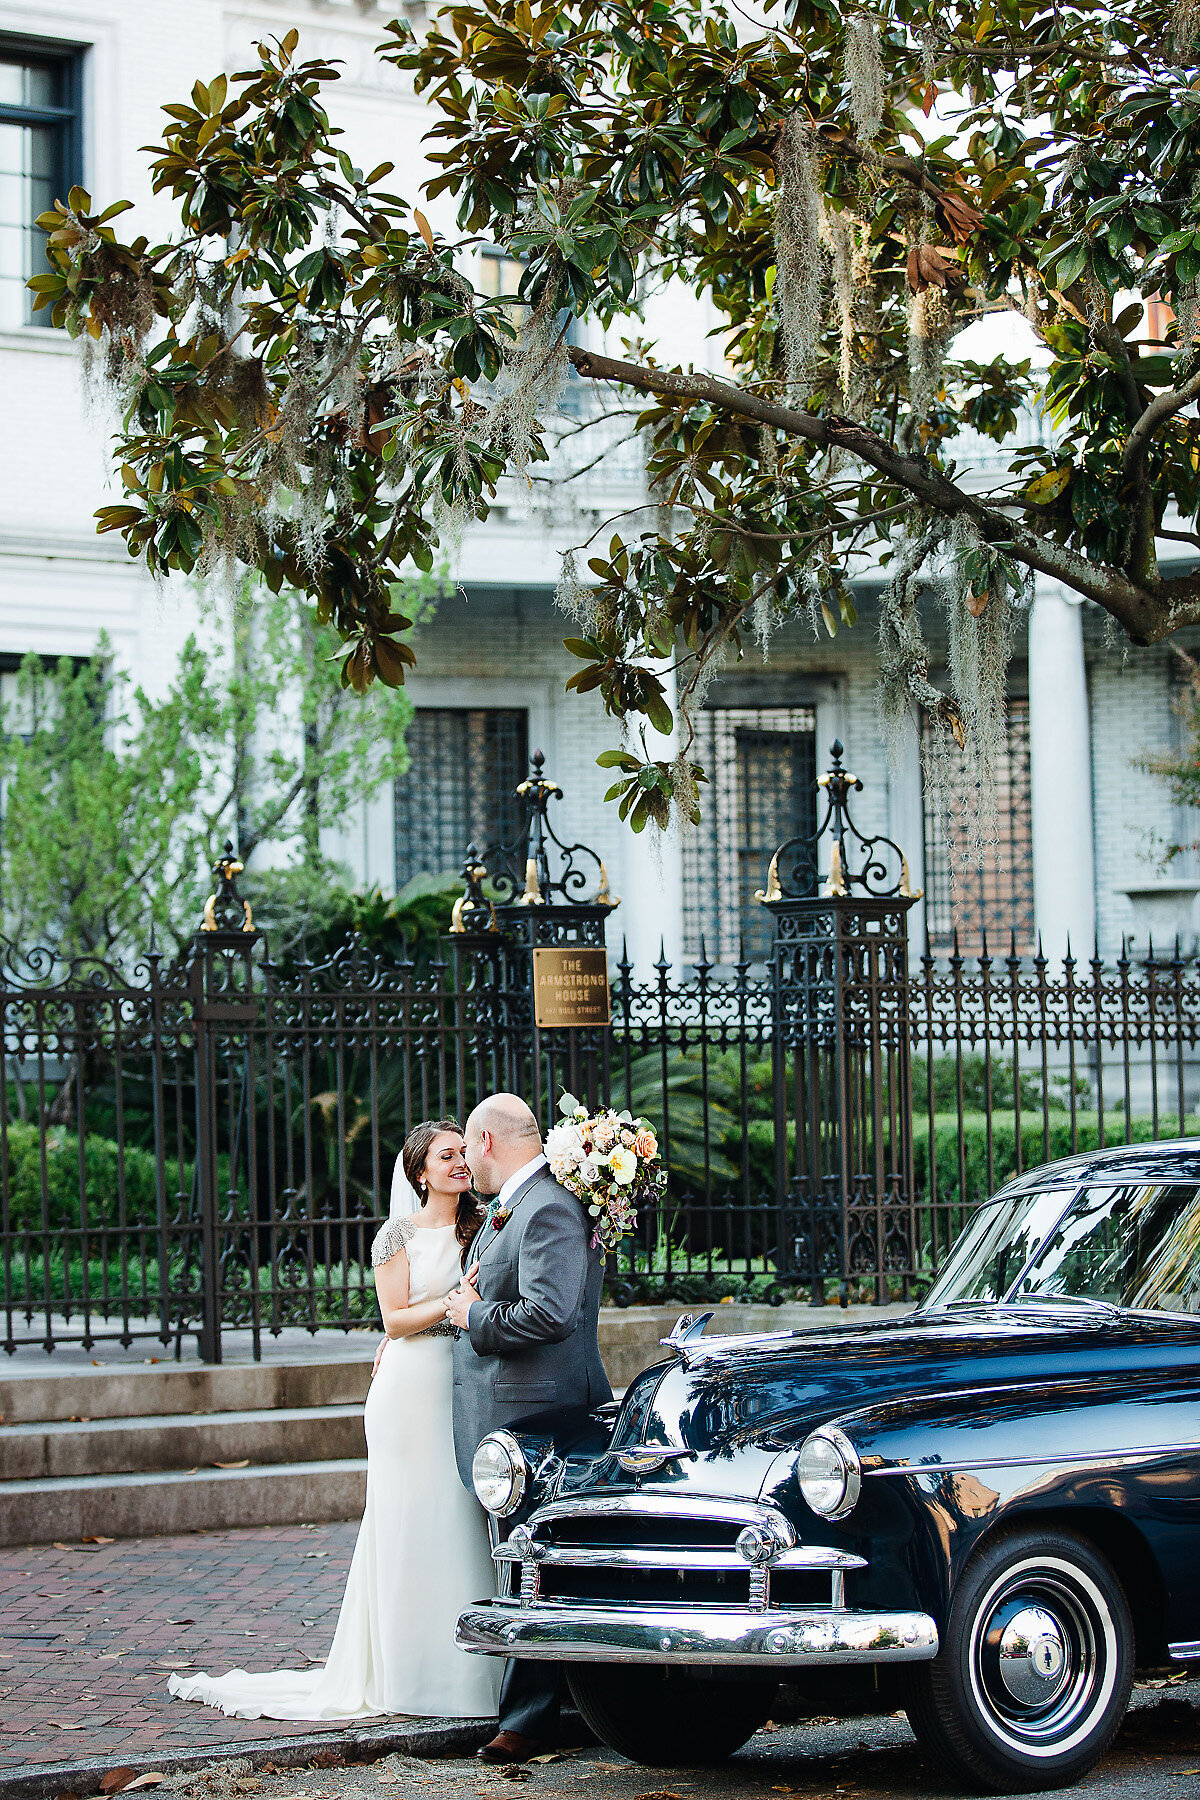 Bride and groom nuzzling one another beside car.